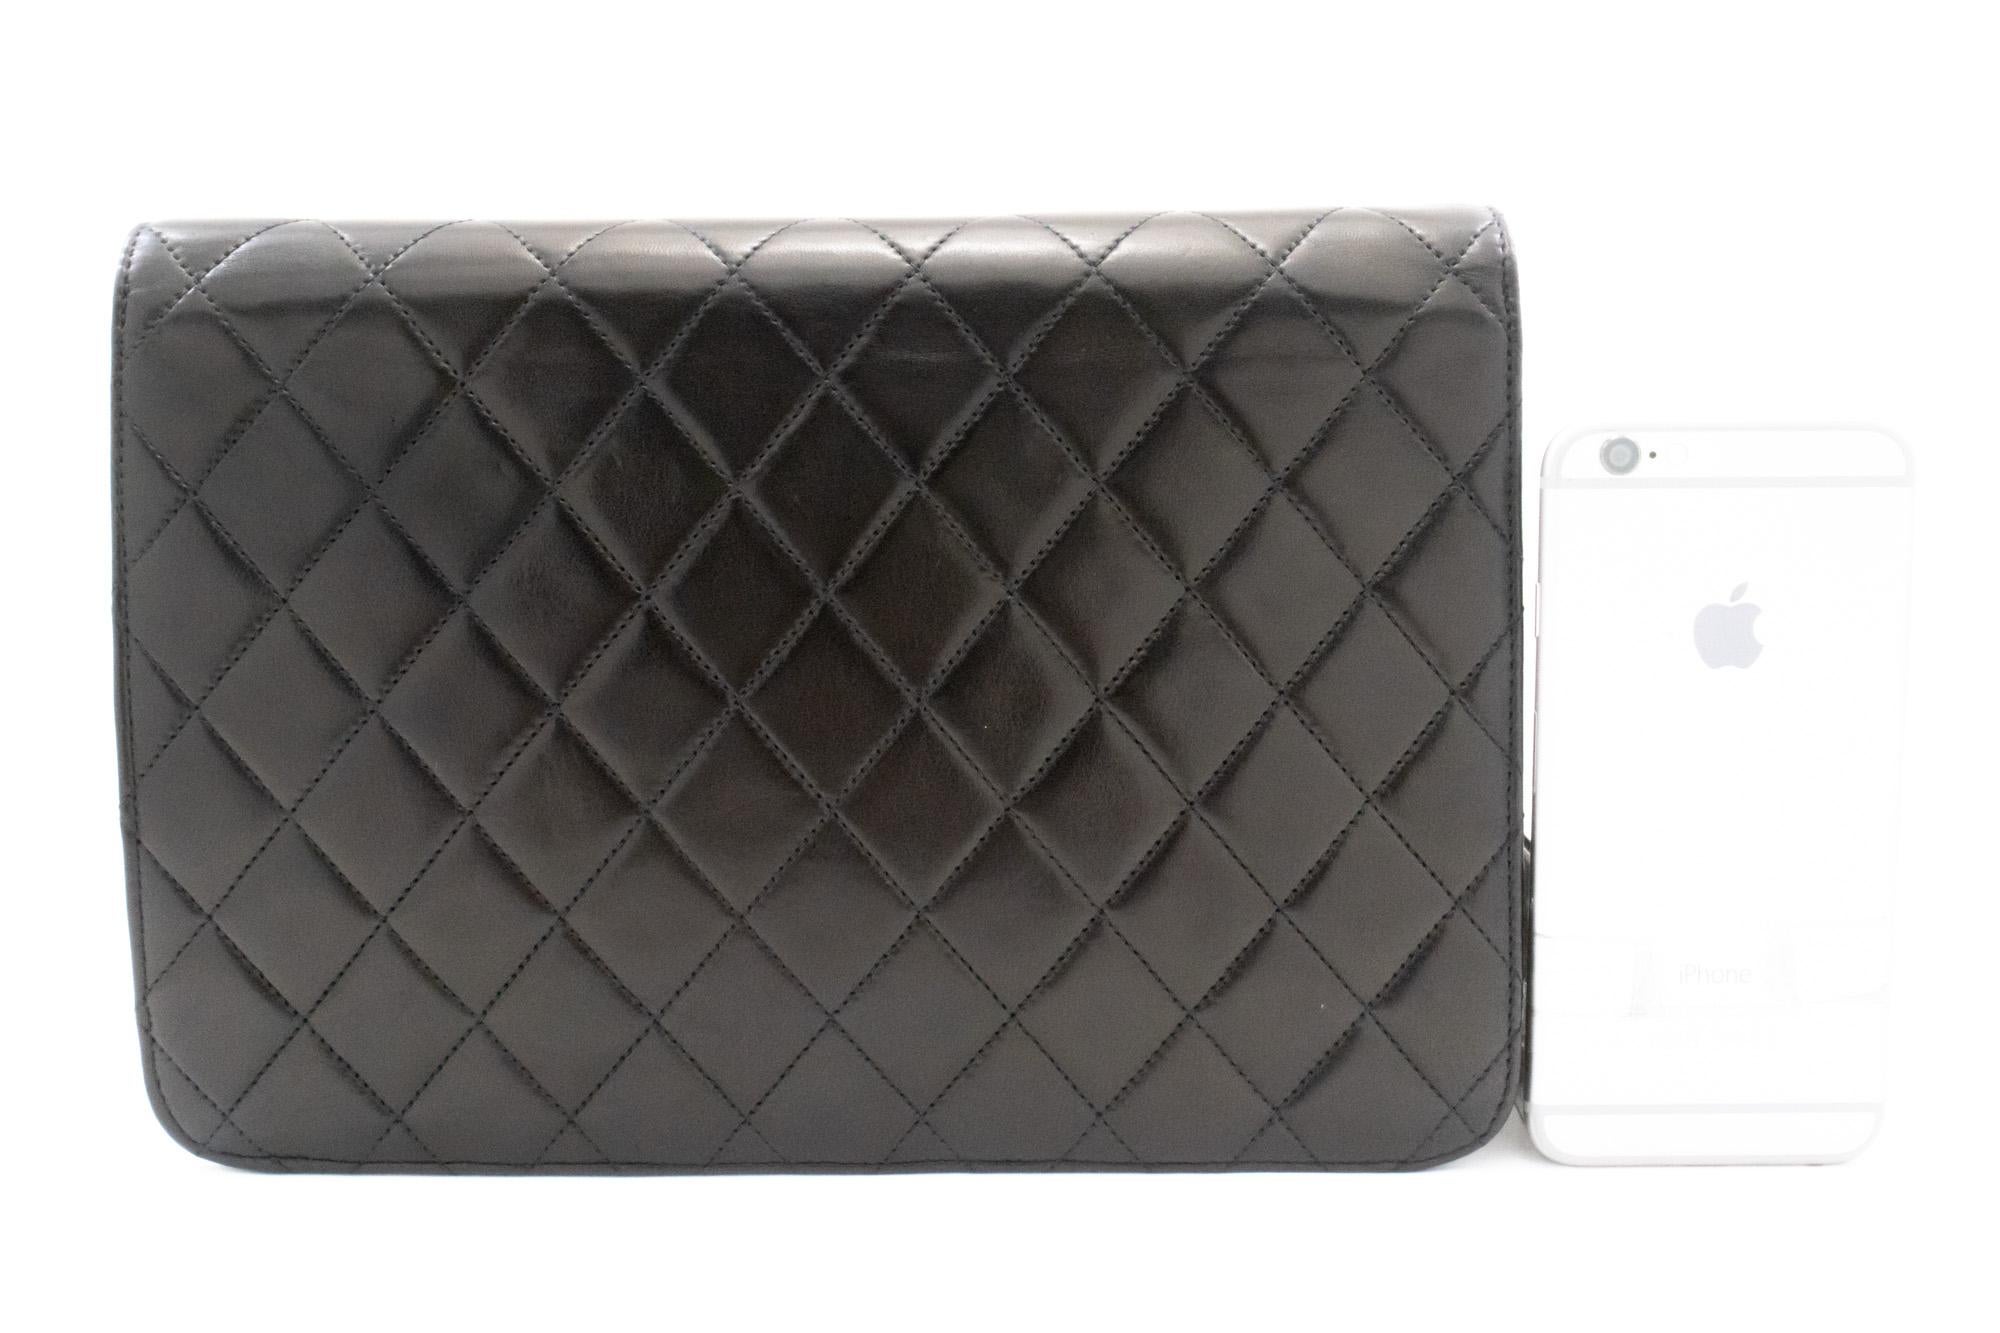 CHANEL Chain Shoulder Bag Black Clutch Flap Quilted Purse Lambskin In Good Condition For Sale In Takamatsu-shi, JP